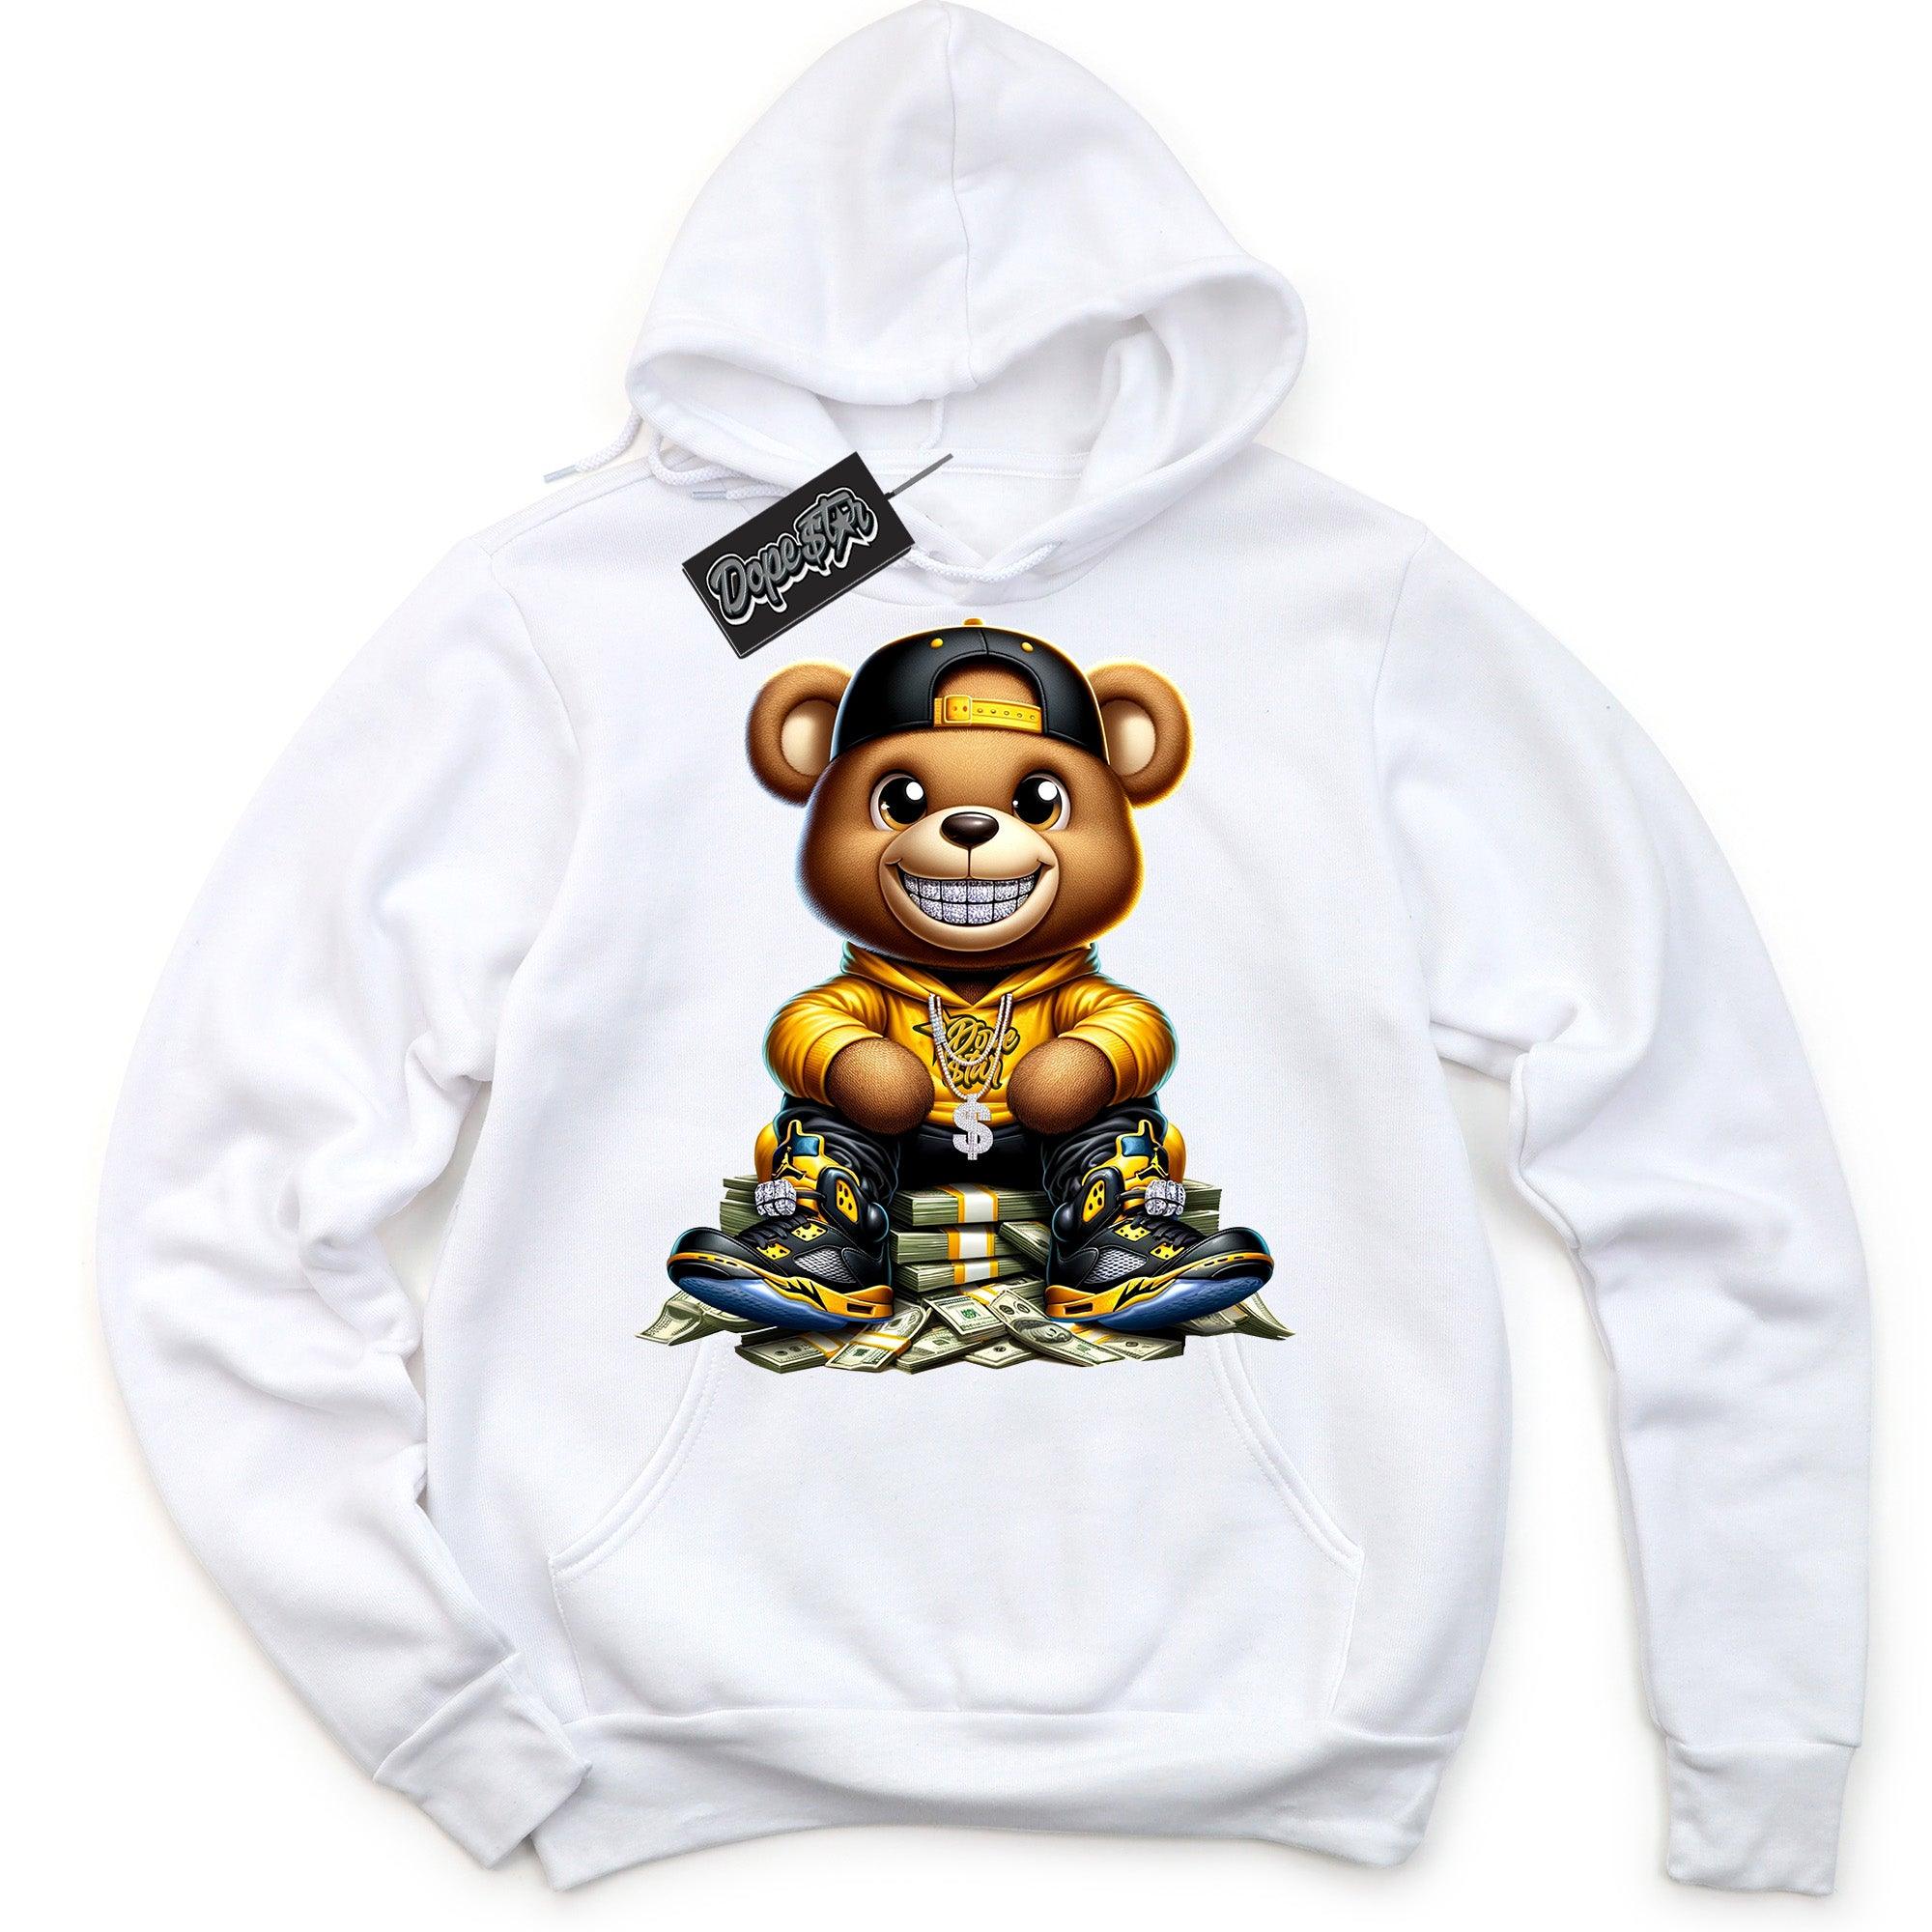 Cool White Graphic Hoodie with “ Dope Star Bear “ print, that perfectly matches Air Jordan 12 BLACK TAXI sneakers